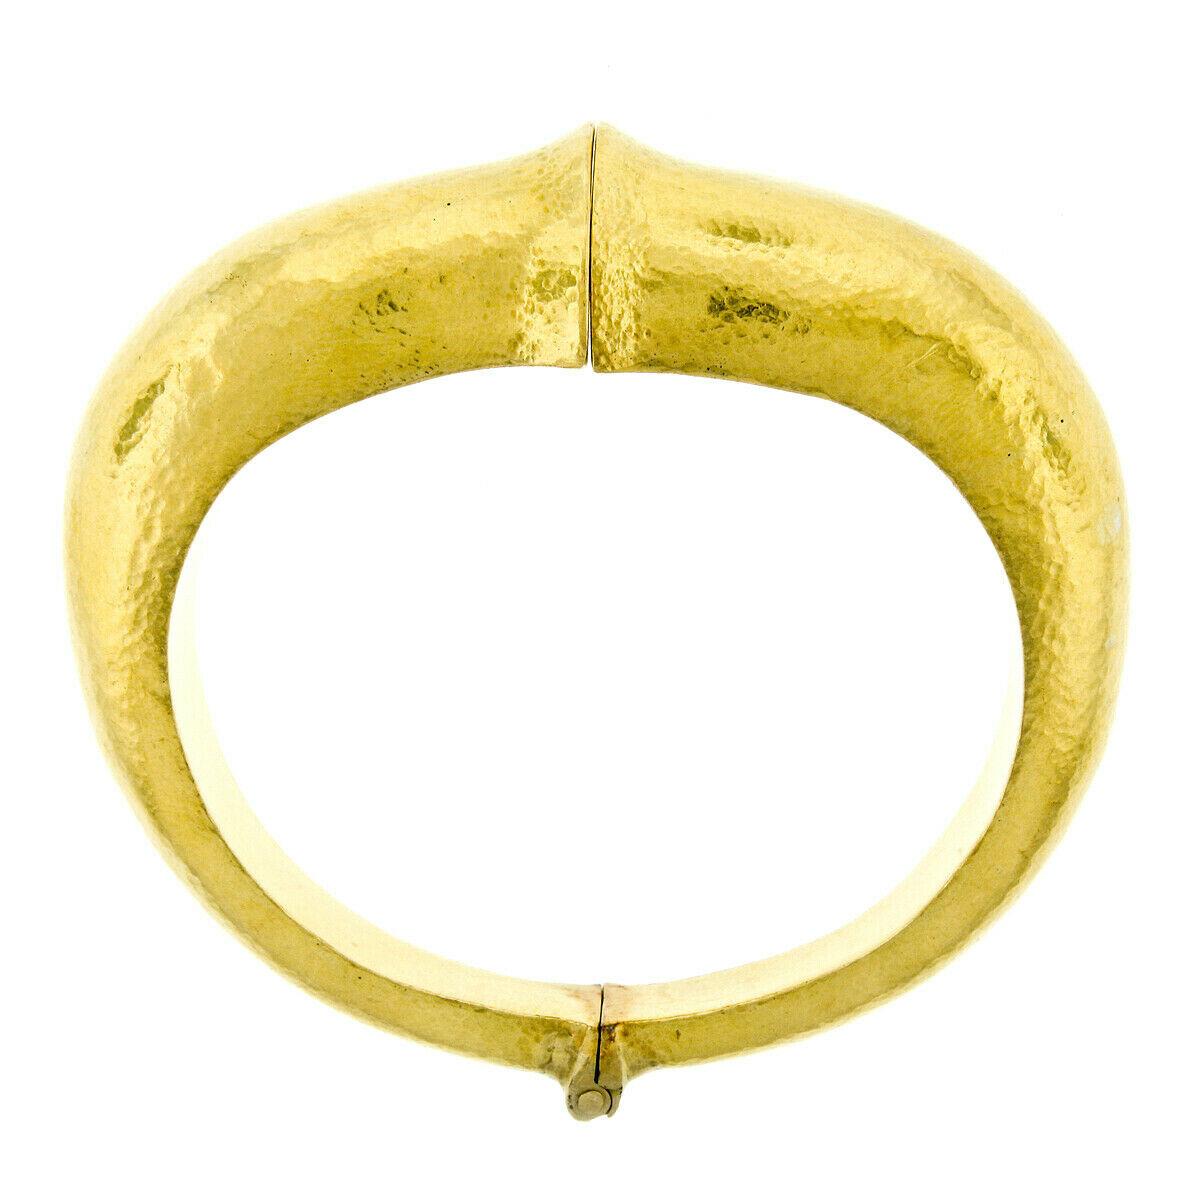 This large and very well-made hinged bangle bracelet was crafted by Zolotas in solid 22k yellow gold. The bracelet has a simple flowing design and features Zolotas's fine hammered finish. Enjoy!

Material: Solid 22k Yellow Gold
Weight: 88.4